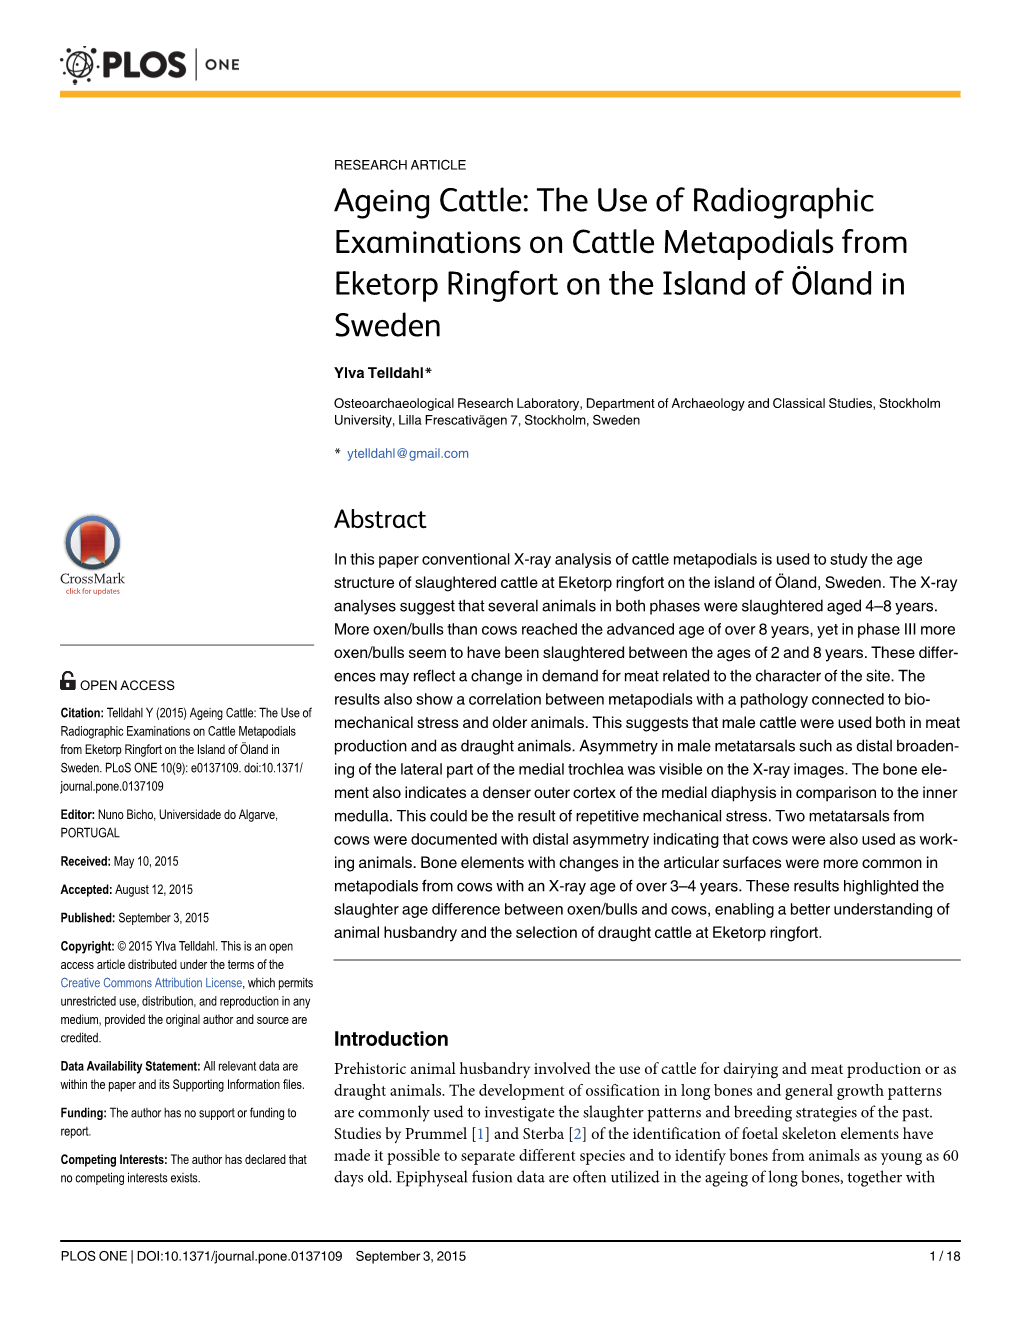 The Use of Radiographic Examinations on Cattle Metapodials from Eketorp Ringfort on the Island of Öland in Sweden